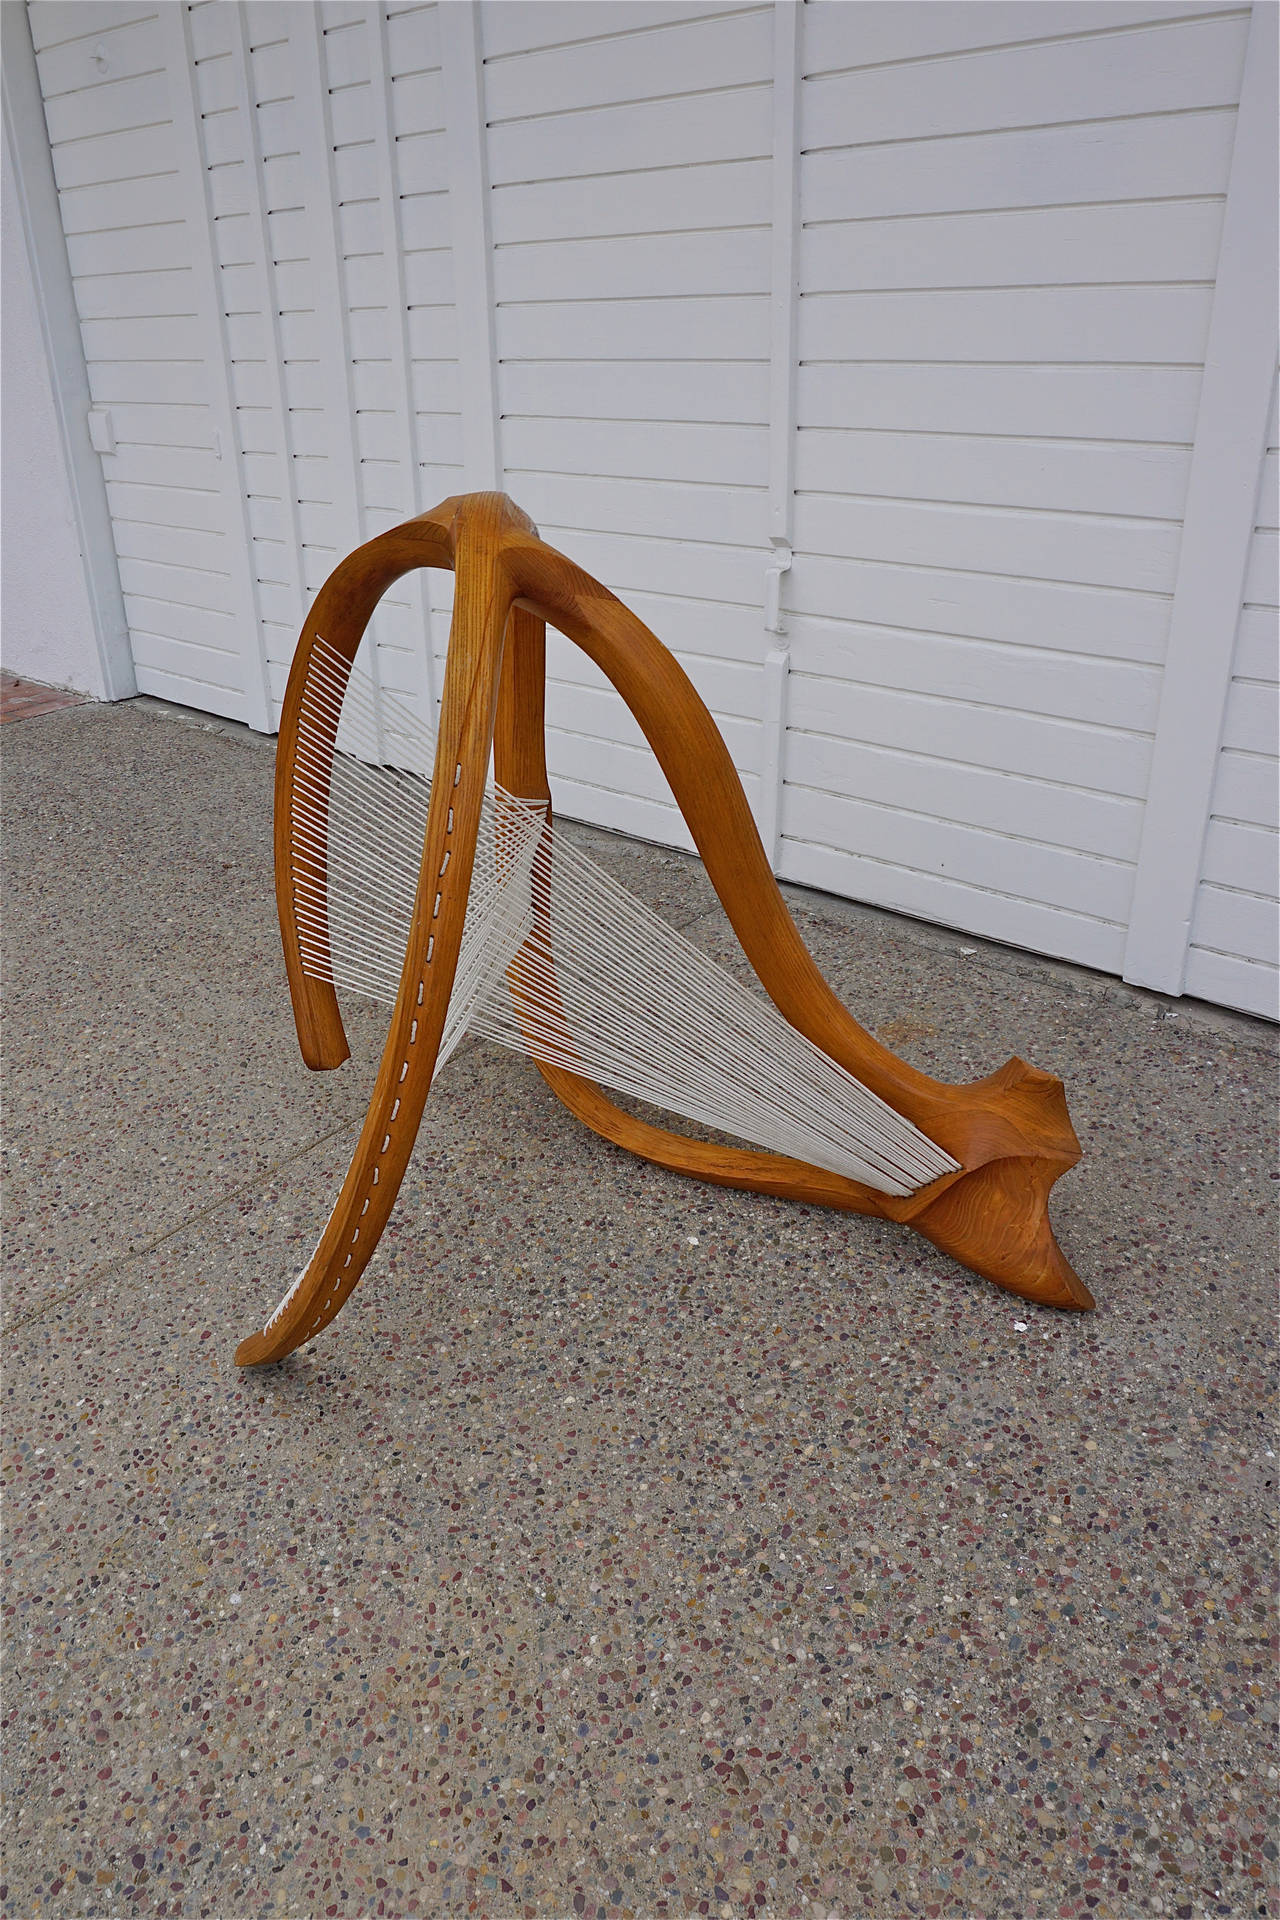 Unique sculpture made from solid pieces of oak, carved and joined, with string added to create an optical effect.
Unsigned.